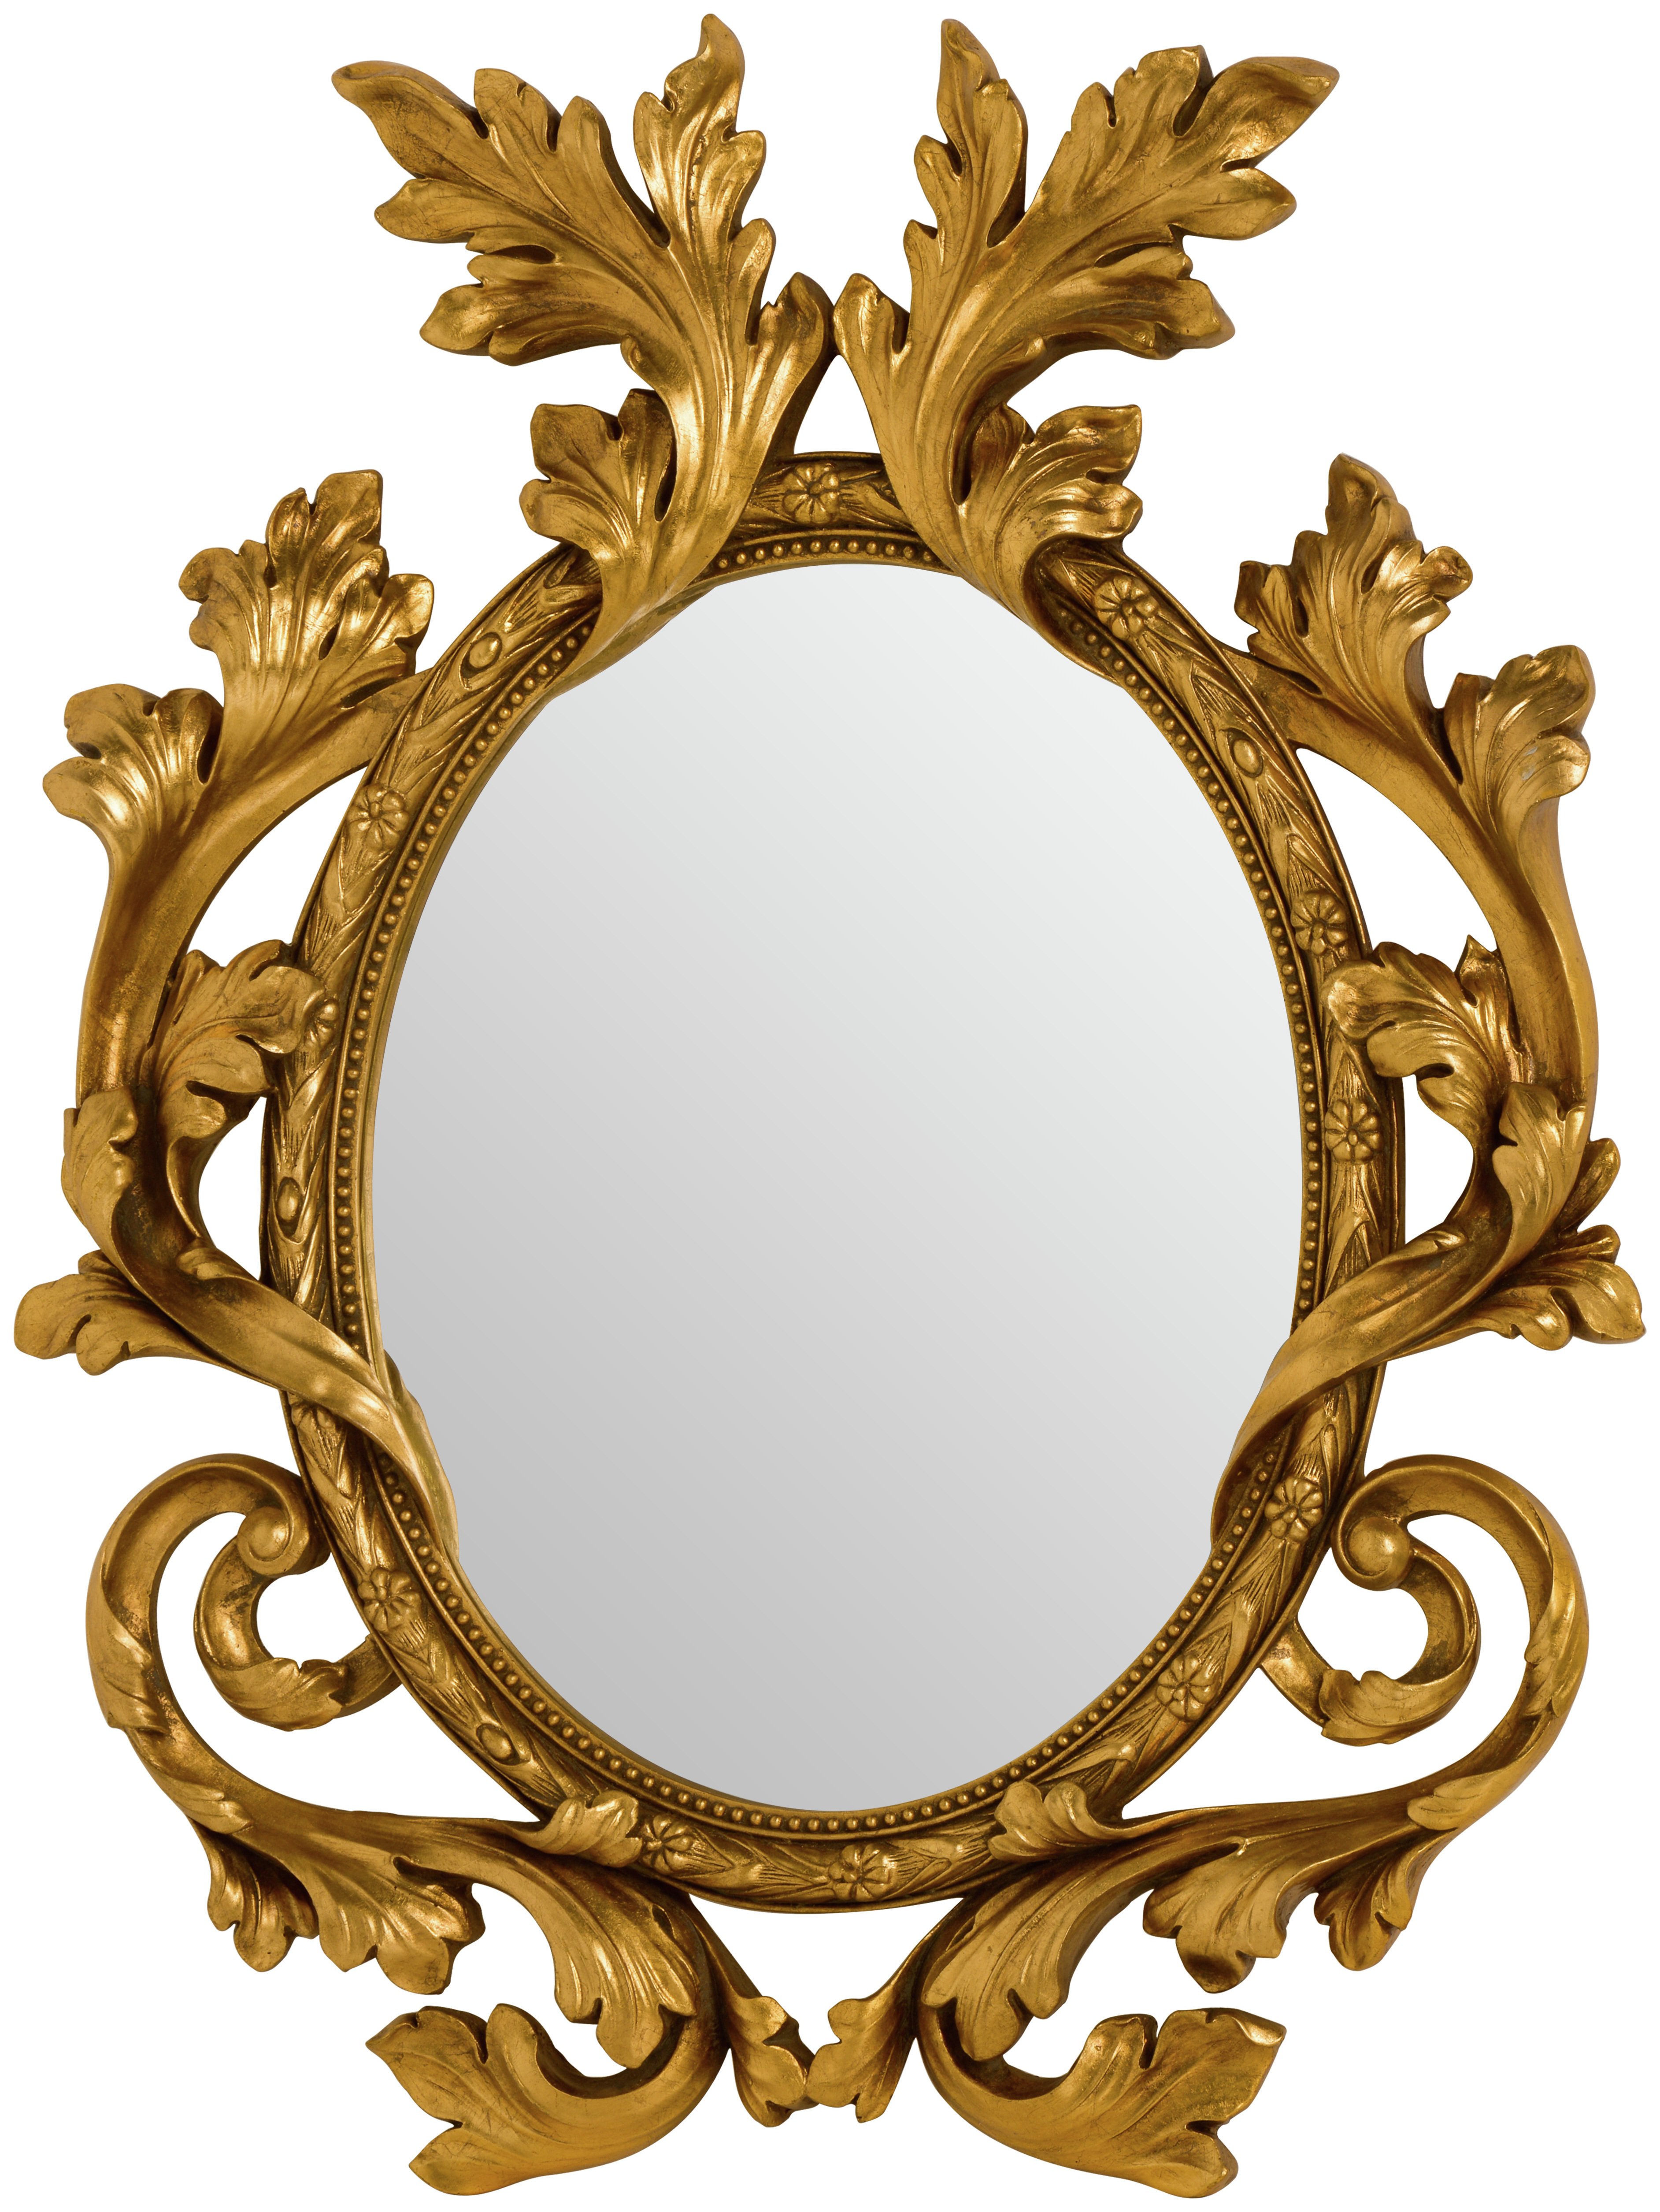 Premier Housewares Oval Antique Wall Mirror - Gold